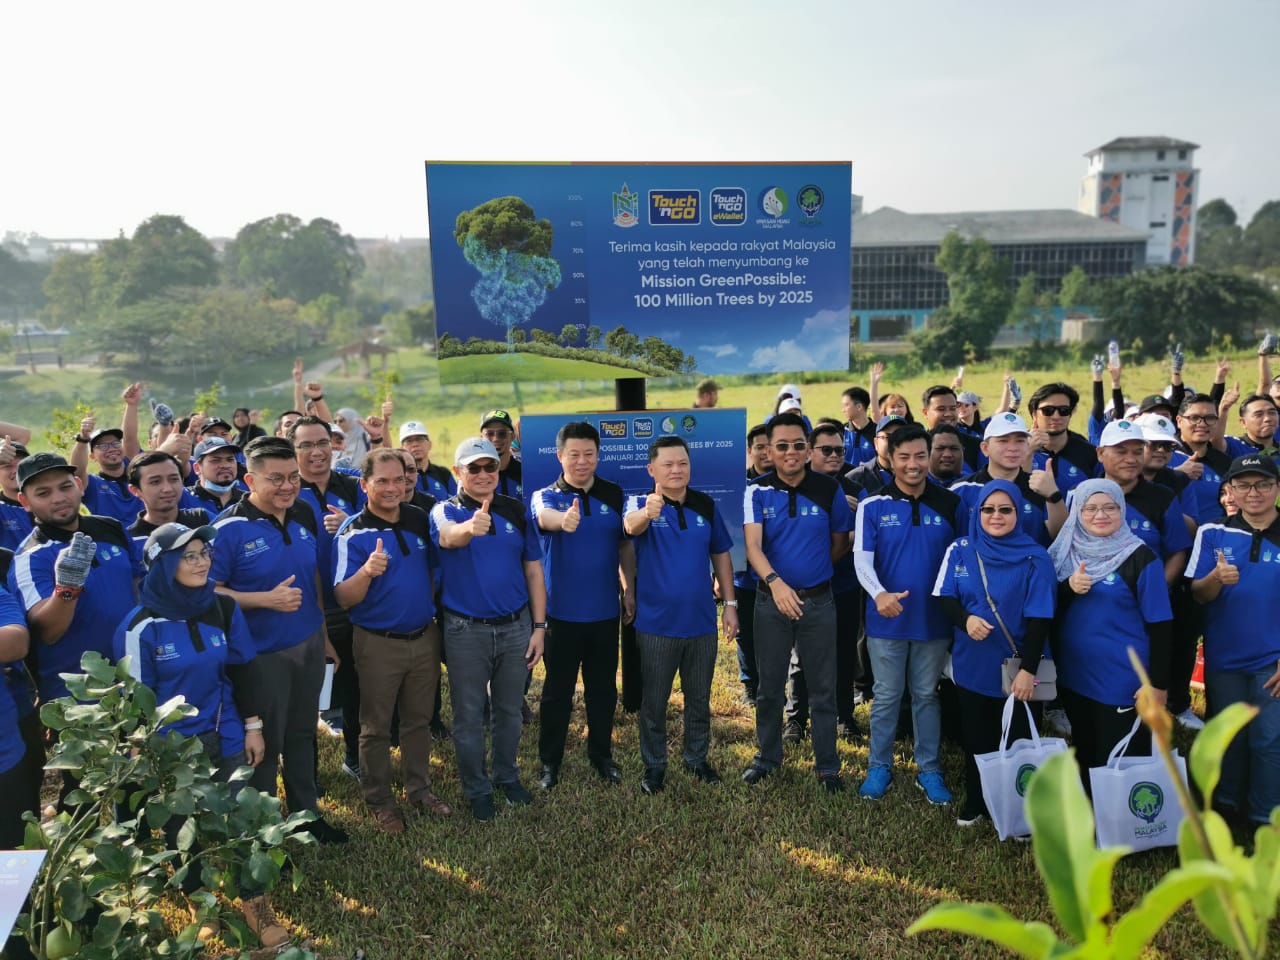 Touch 'n Go eWallet Plants First Batch of Trees under Mission GreenPossible campaign